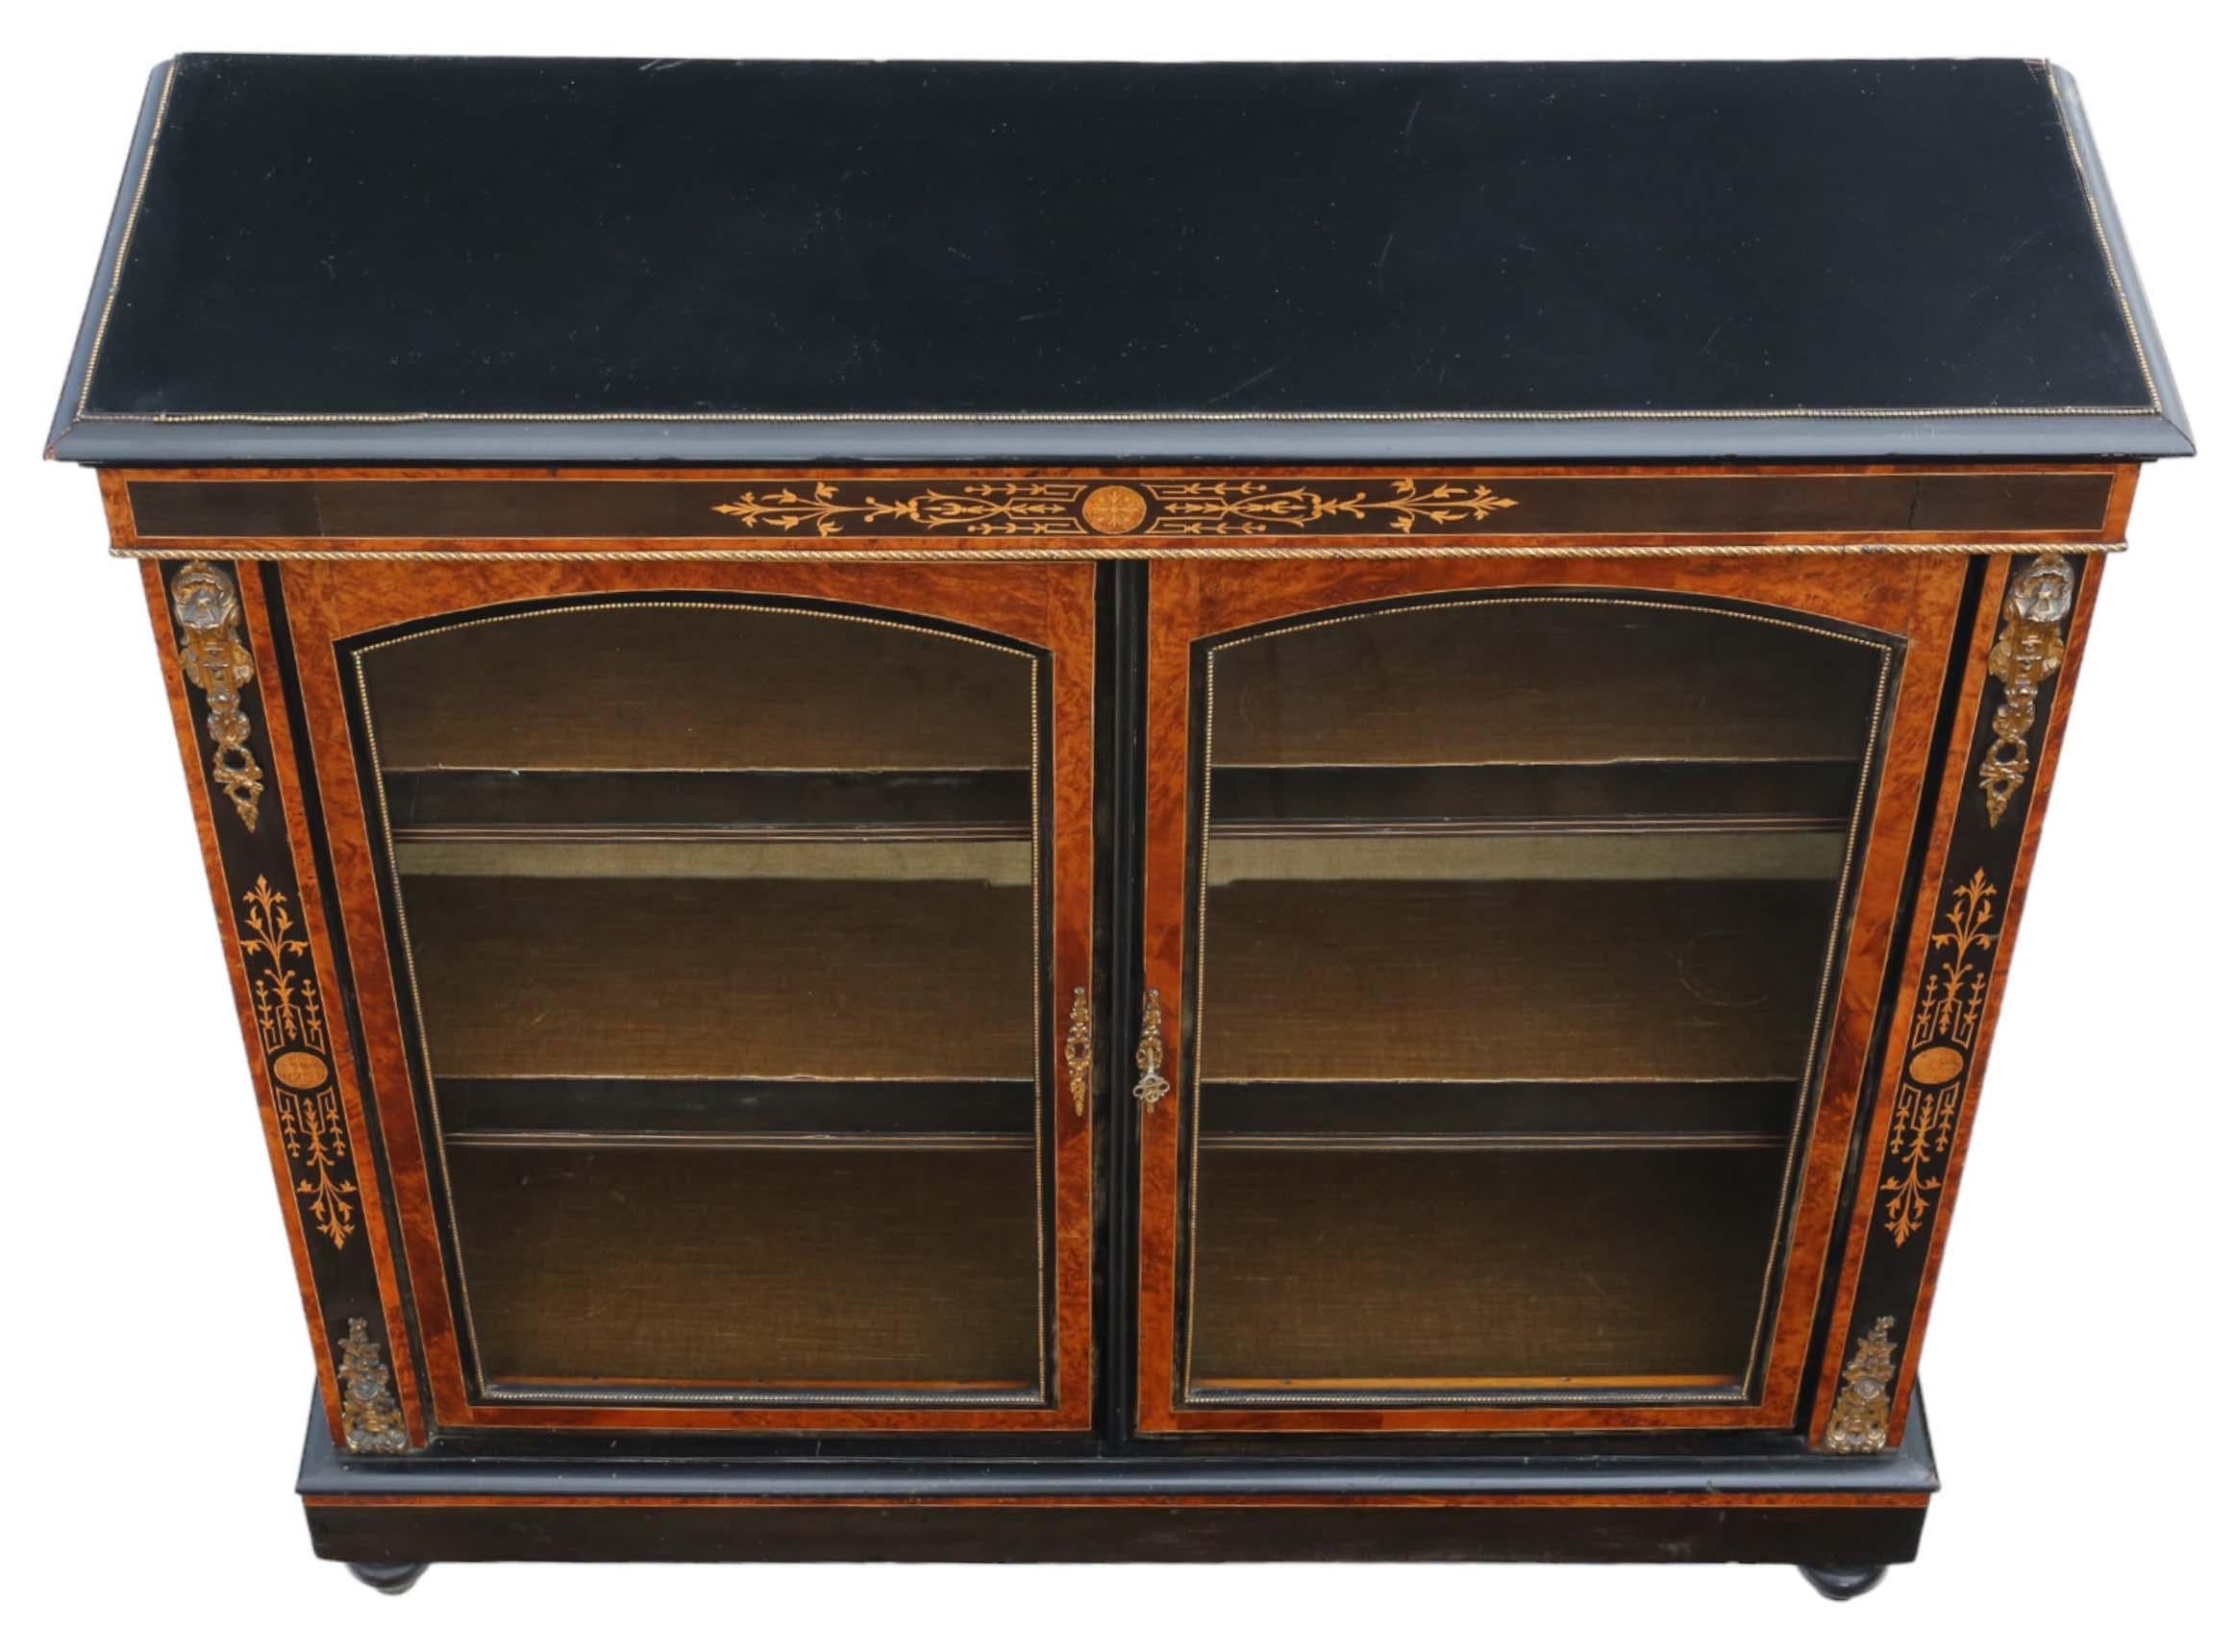 Antique C1880 large quality inlaid burr walnut display cabinet In Good Condition For Sale In Wisbech, Cambridgeshire